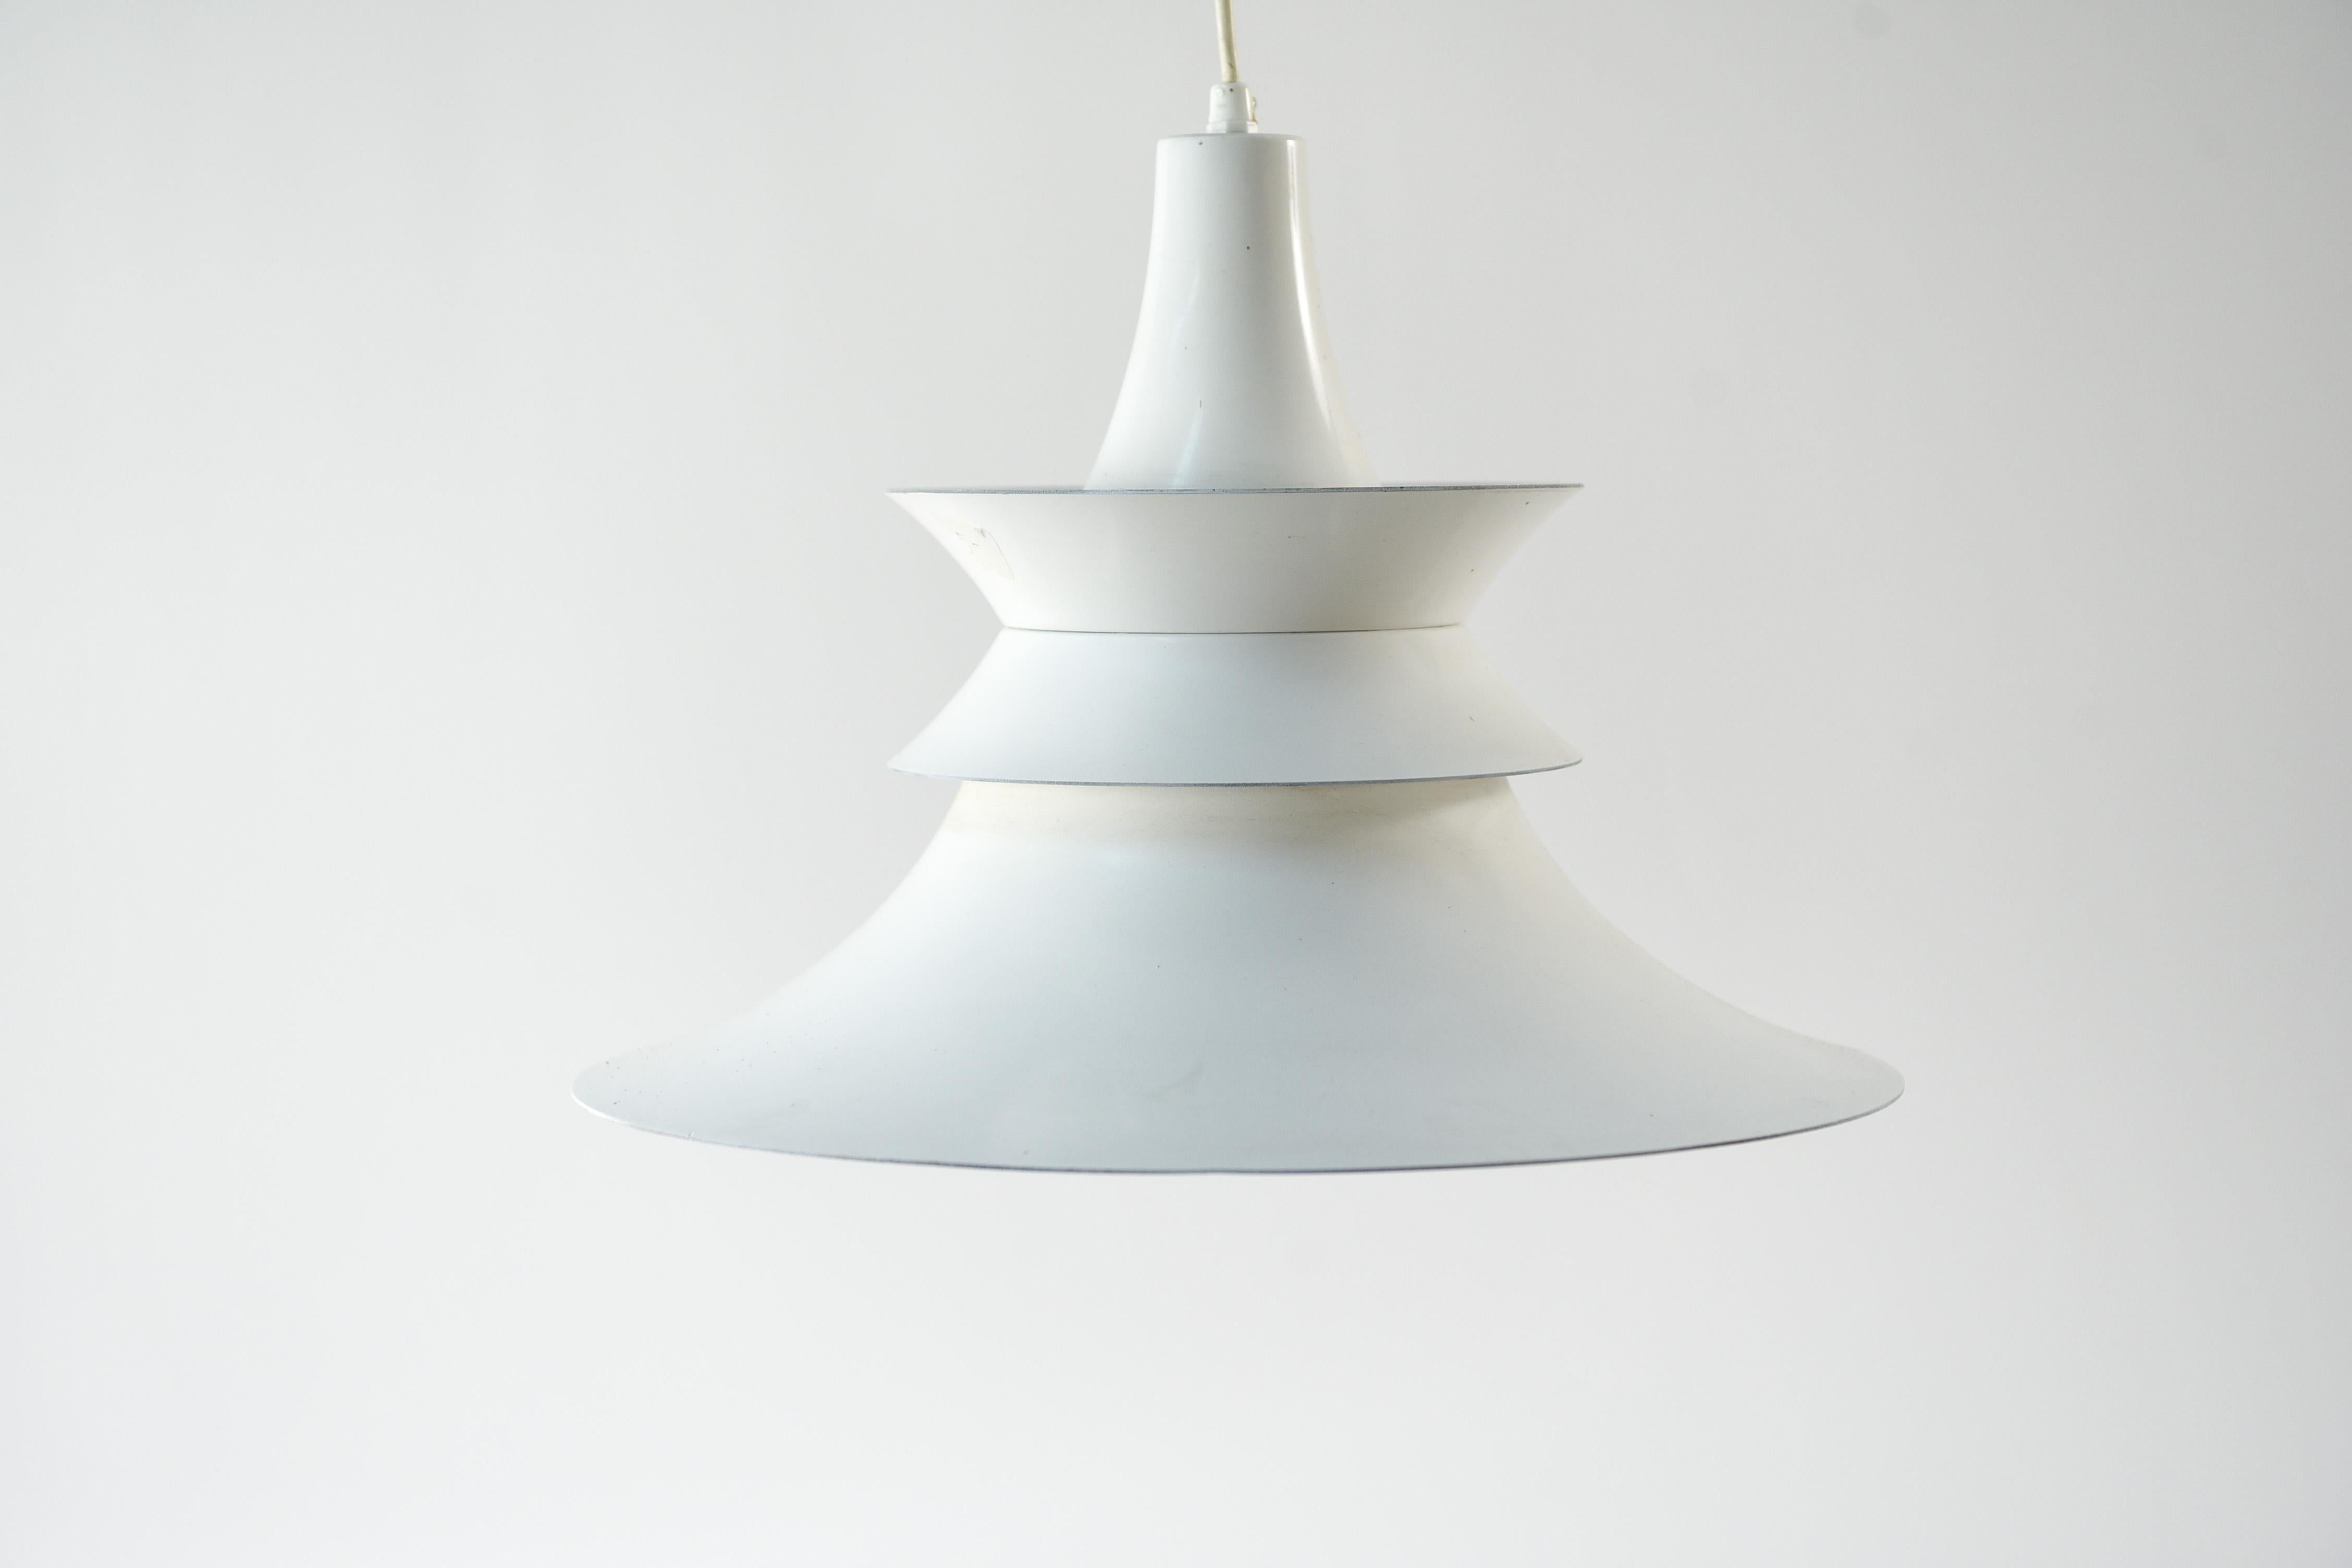 This Danish midcentury pendant light was produced by Fog and Morup. The 1960s design is attributed to Erik Balslev, and features clean modern lines, complemented by the white color of the pendant.